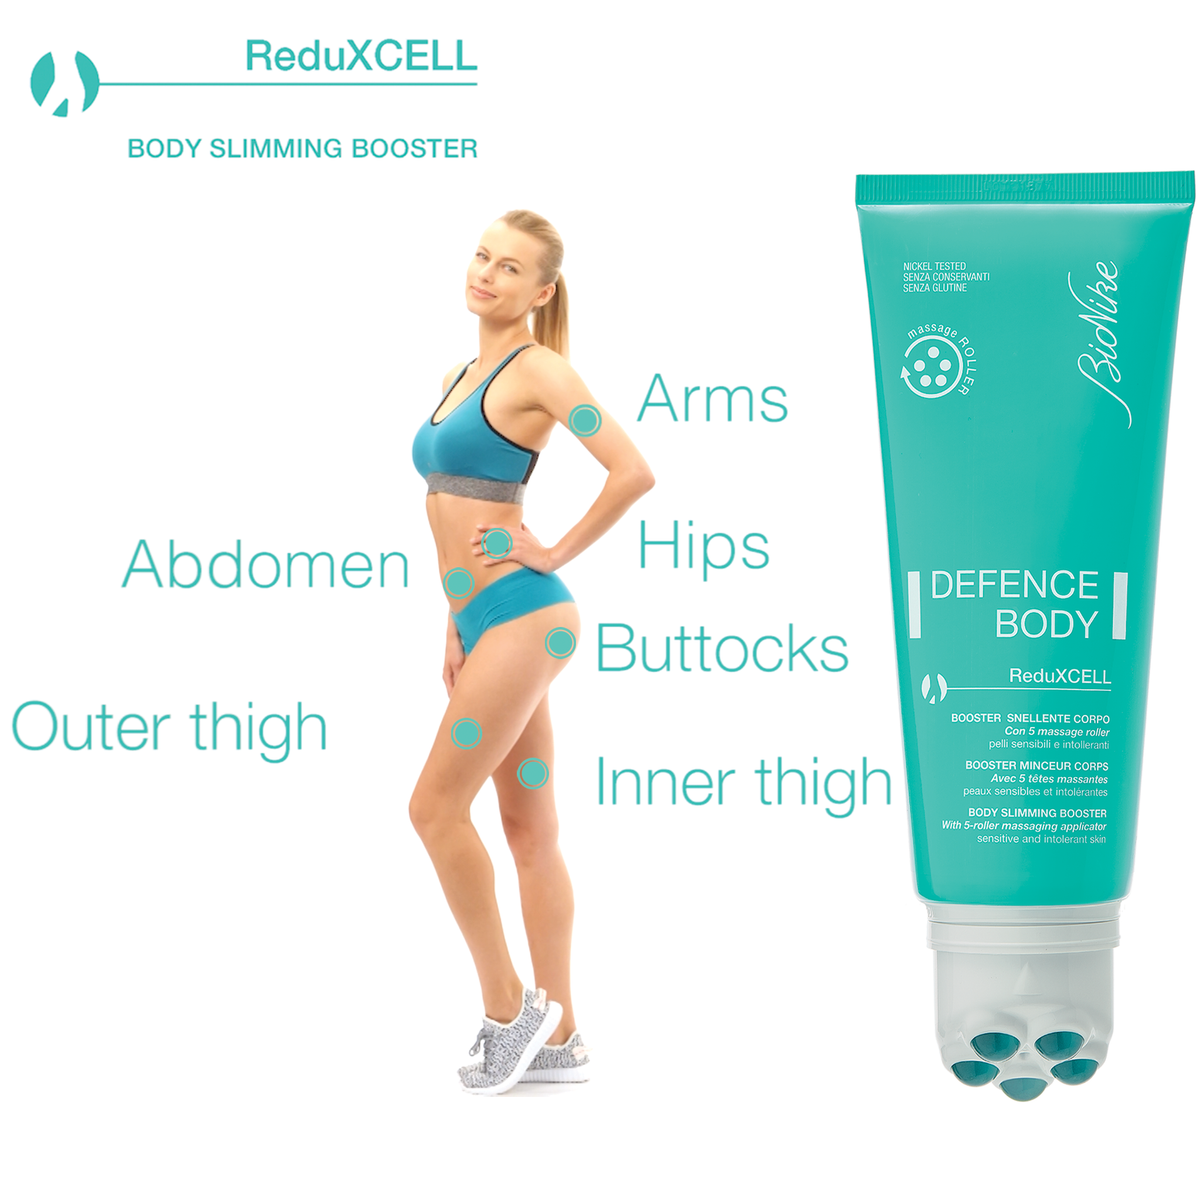 DEFENCE BODY ReduXCELLBODY SLIMMING BOOSTER With 5-roller